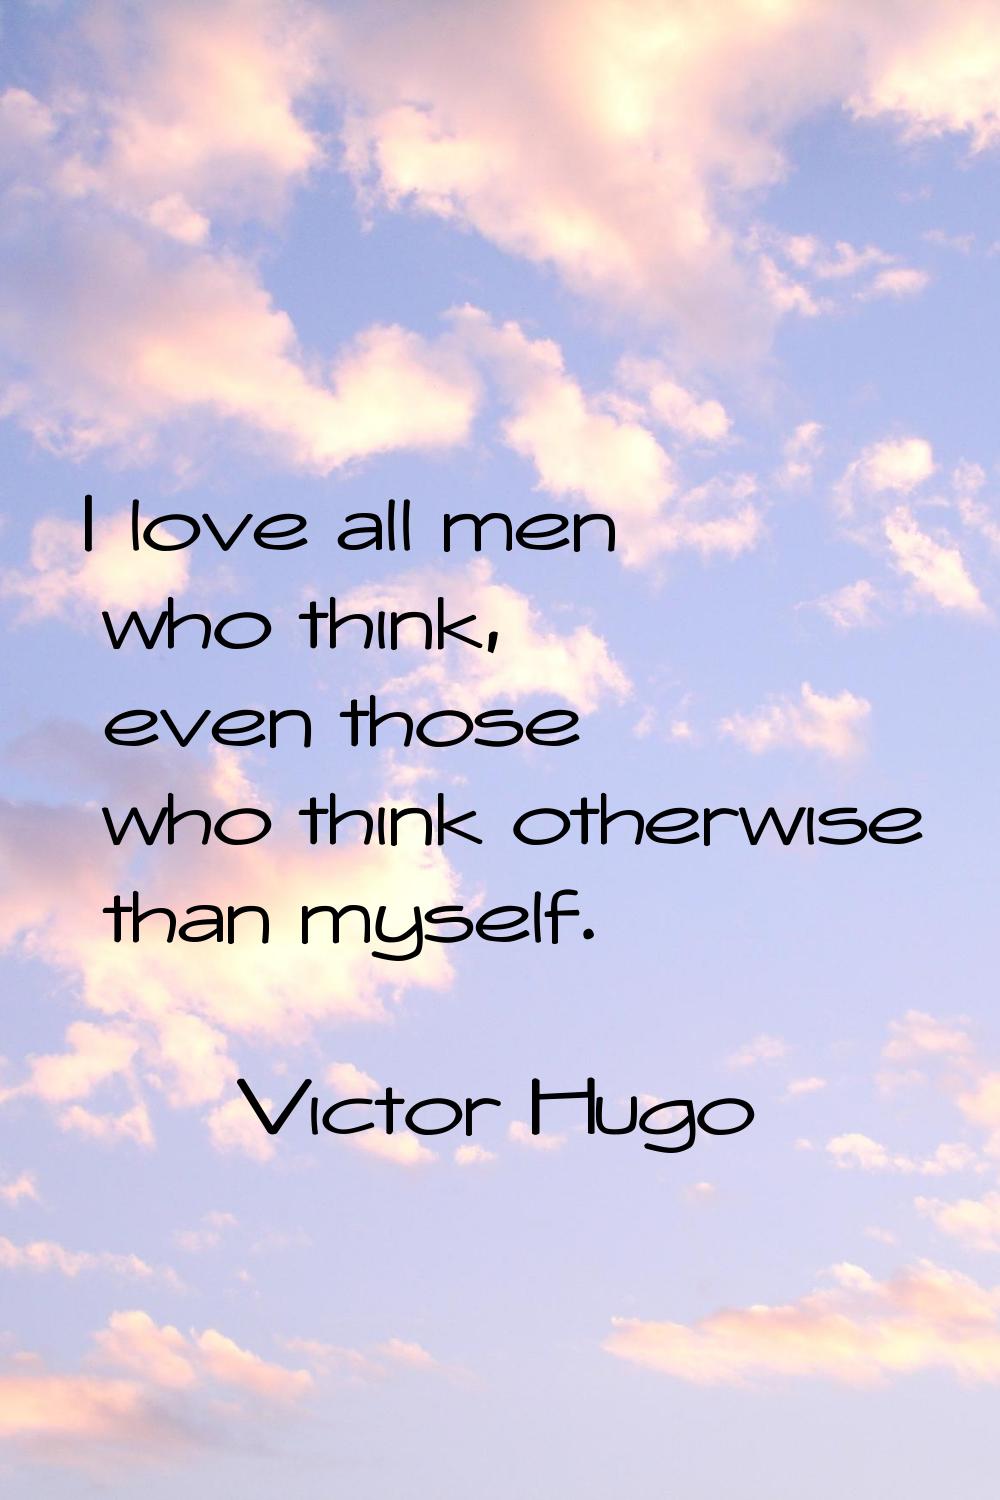 I love all men who think, even those who think otherwise than myself.